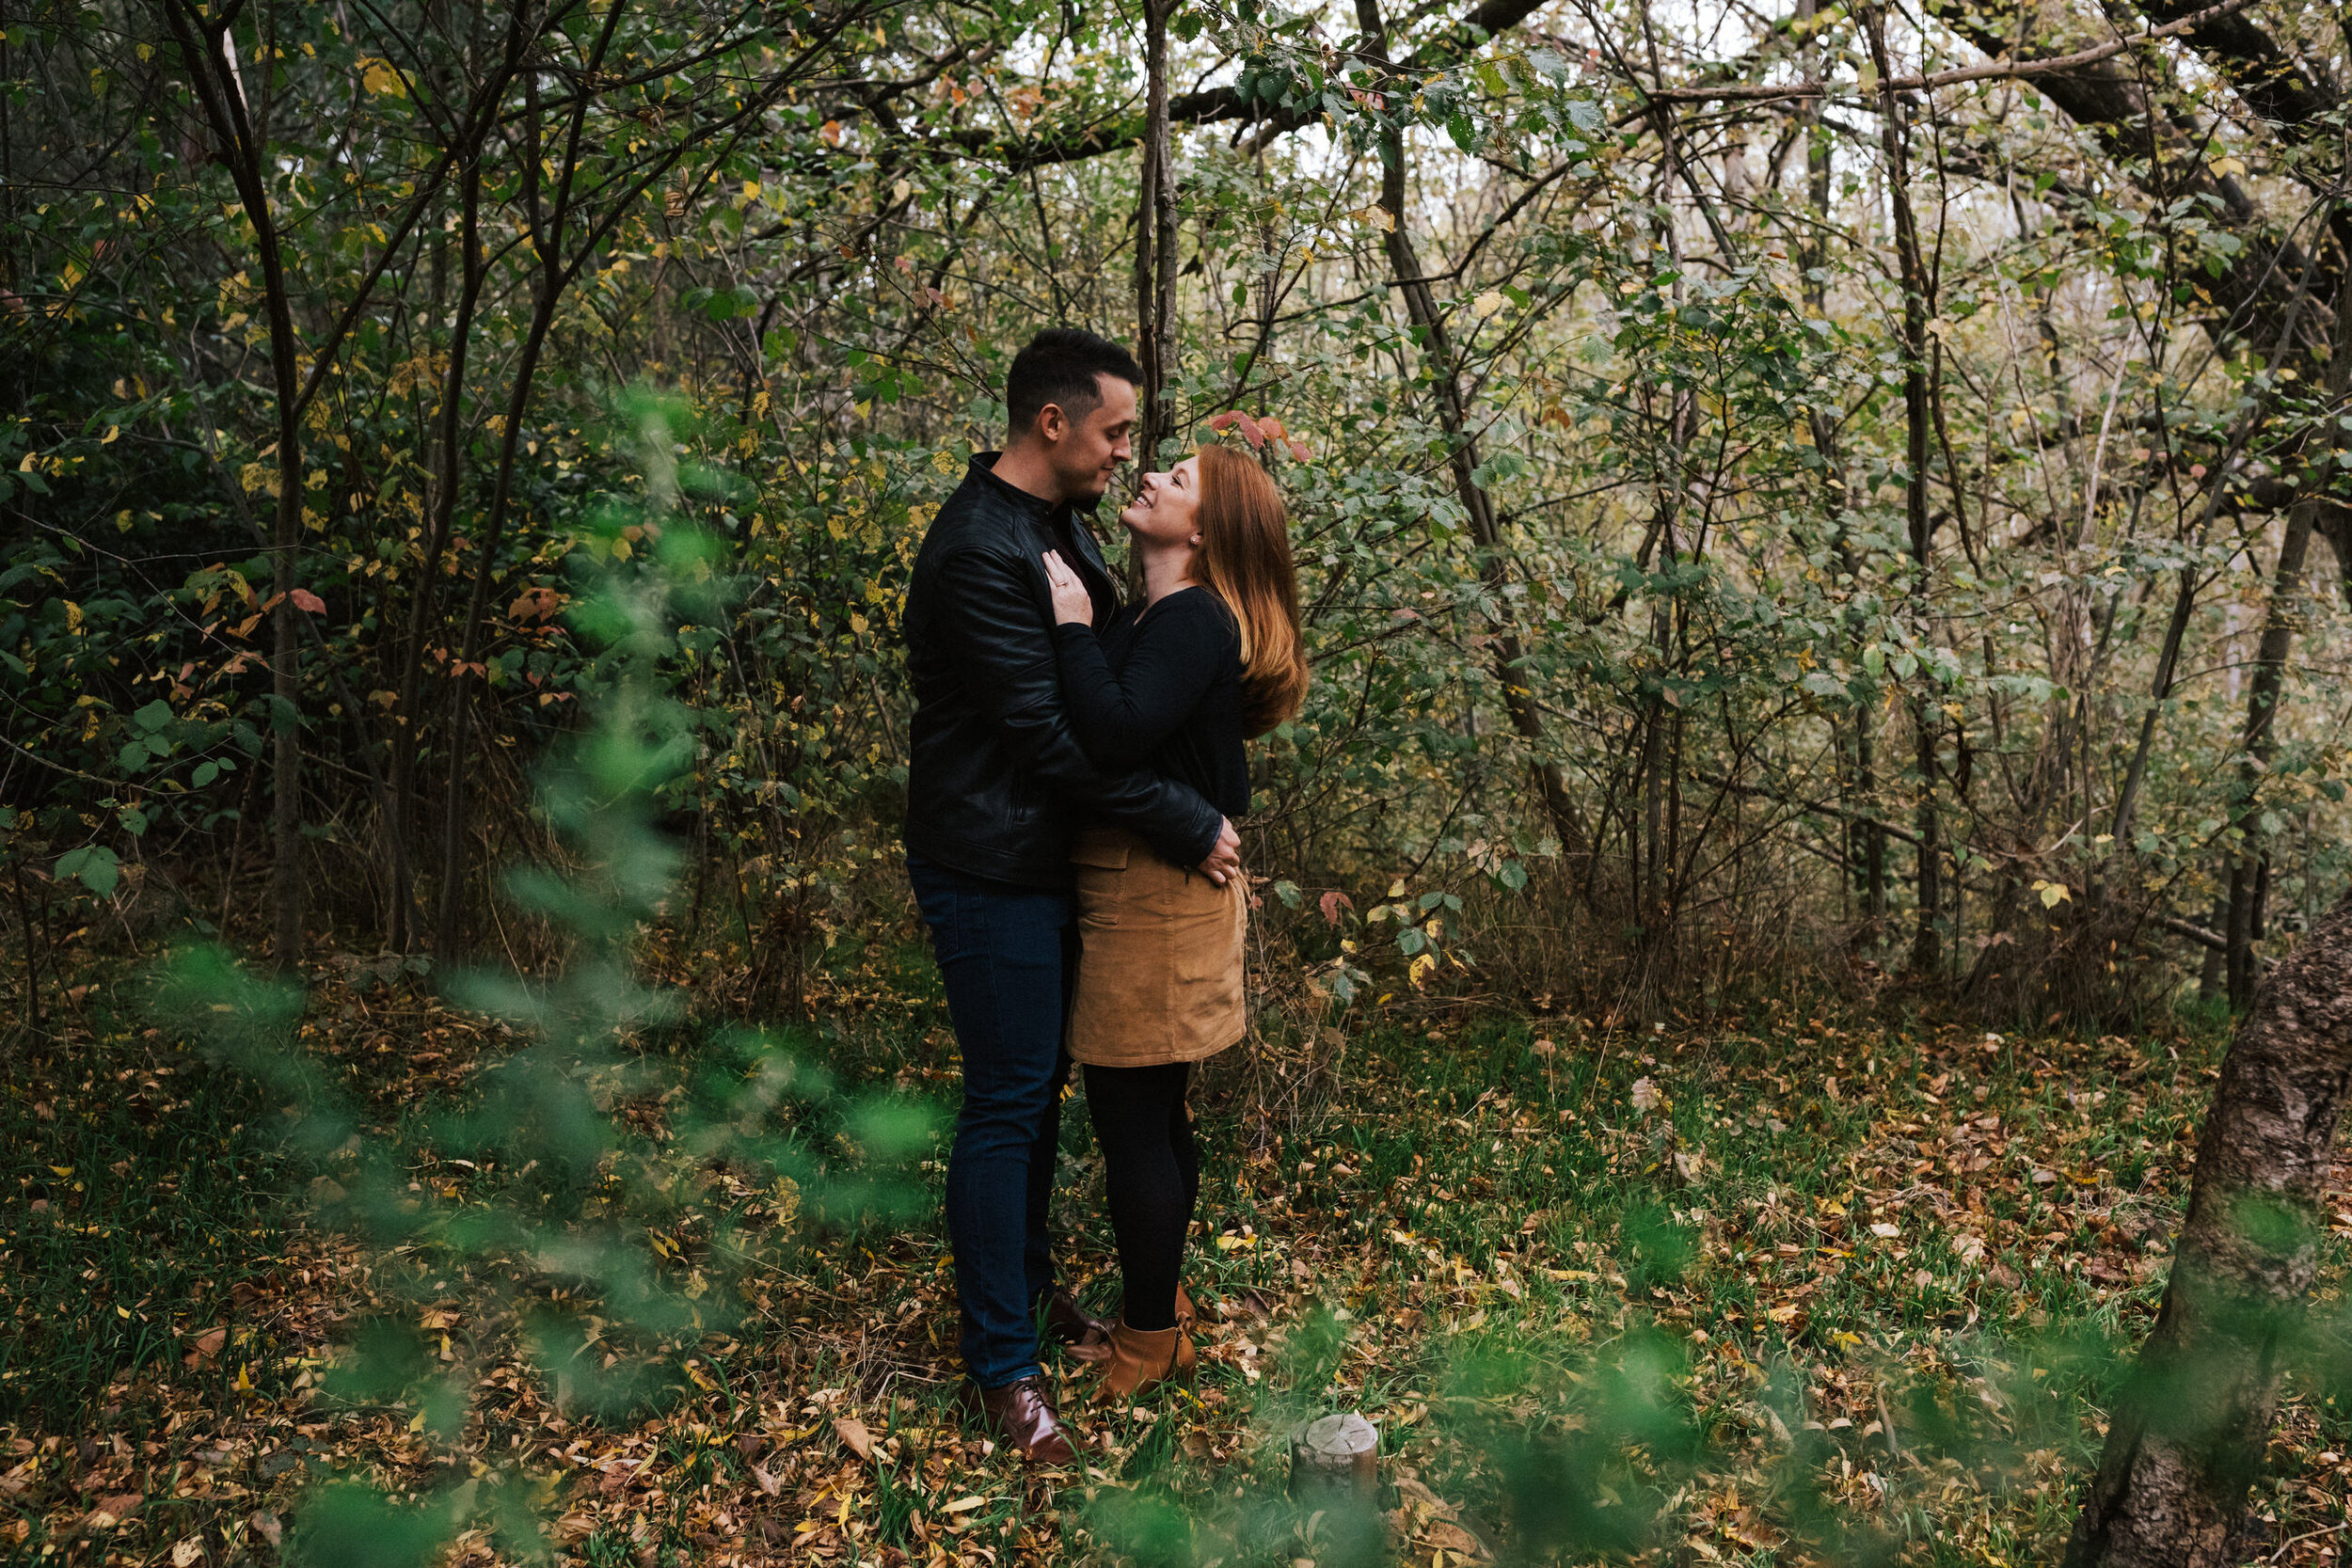 Wintery Autumn Adelaide Hills Engagement Session 10.JPG